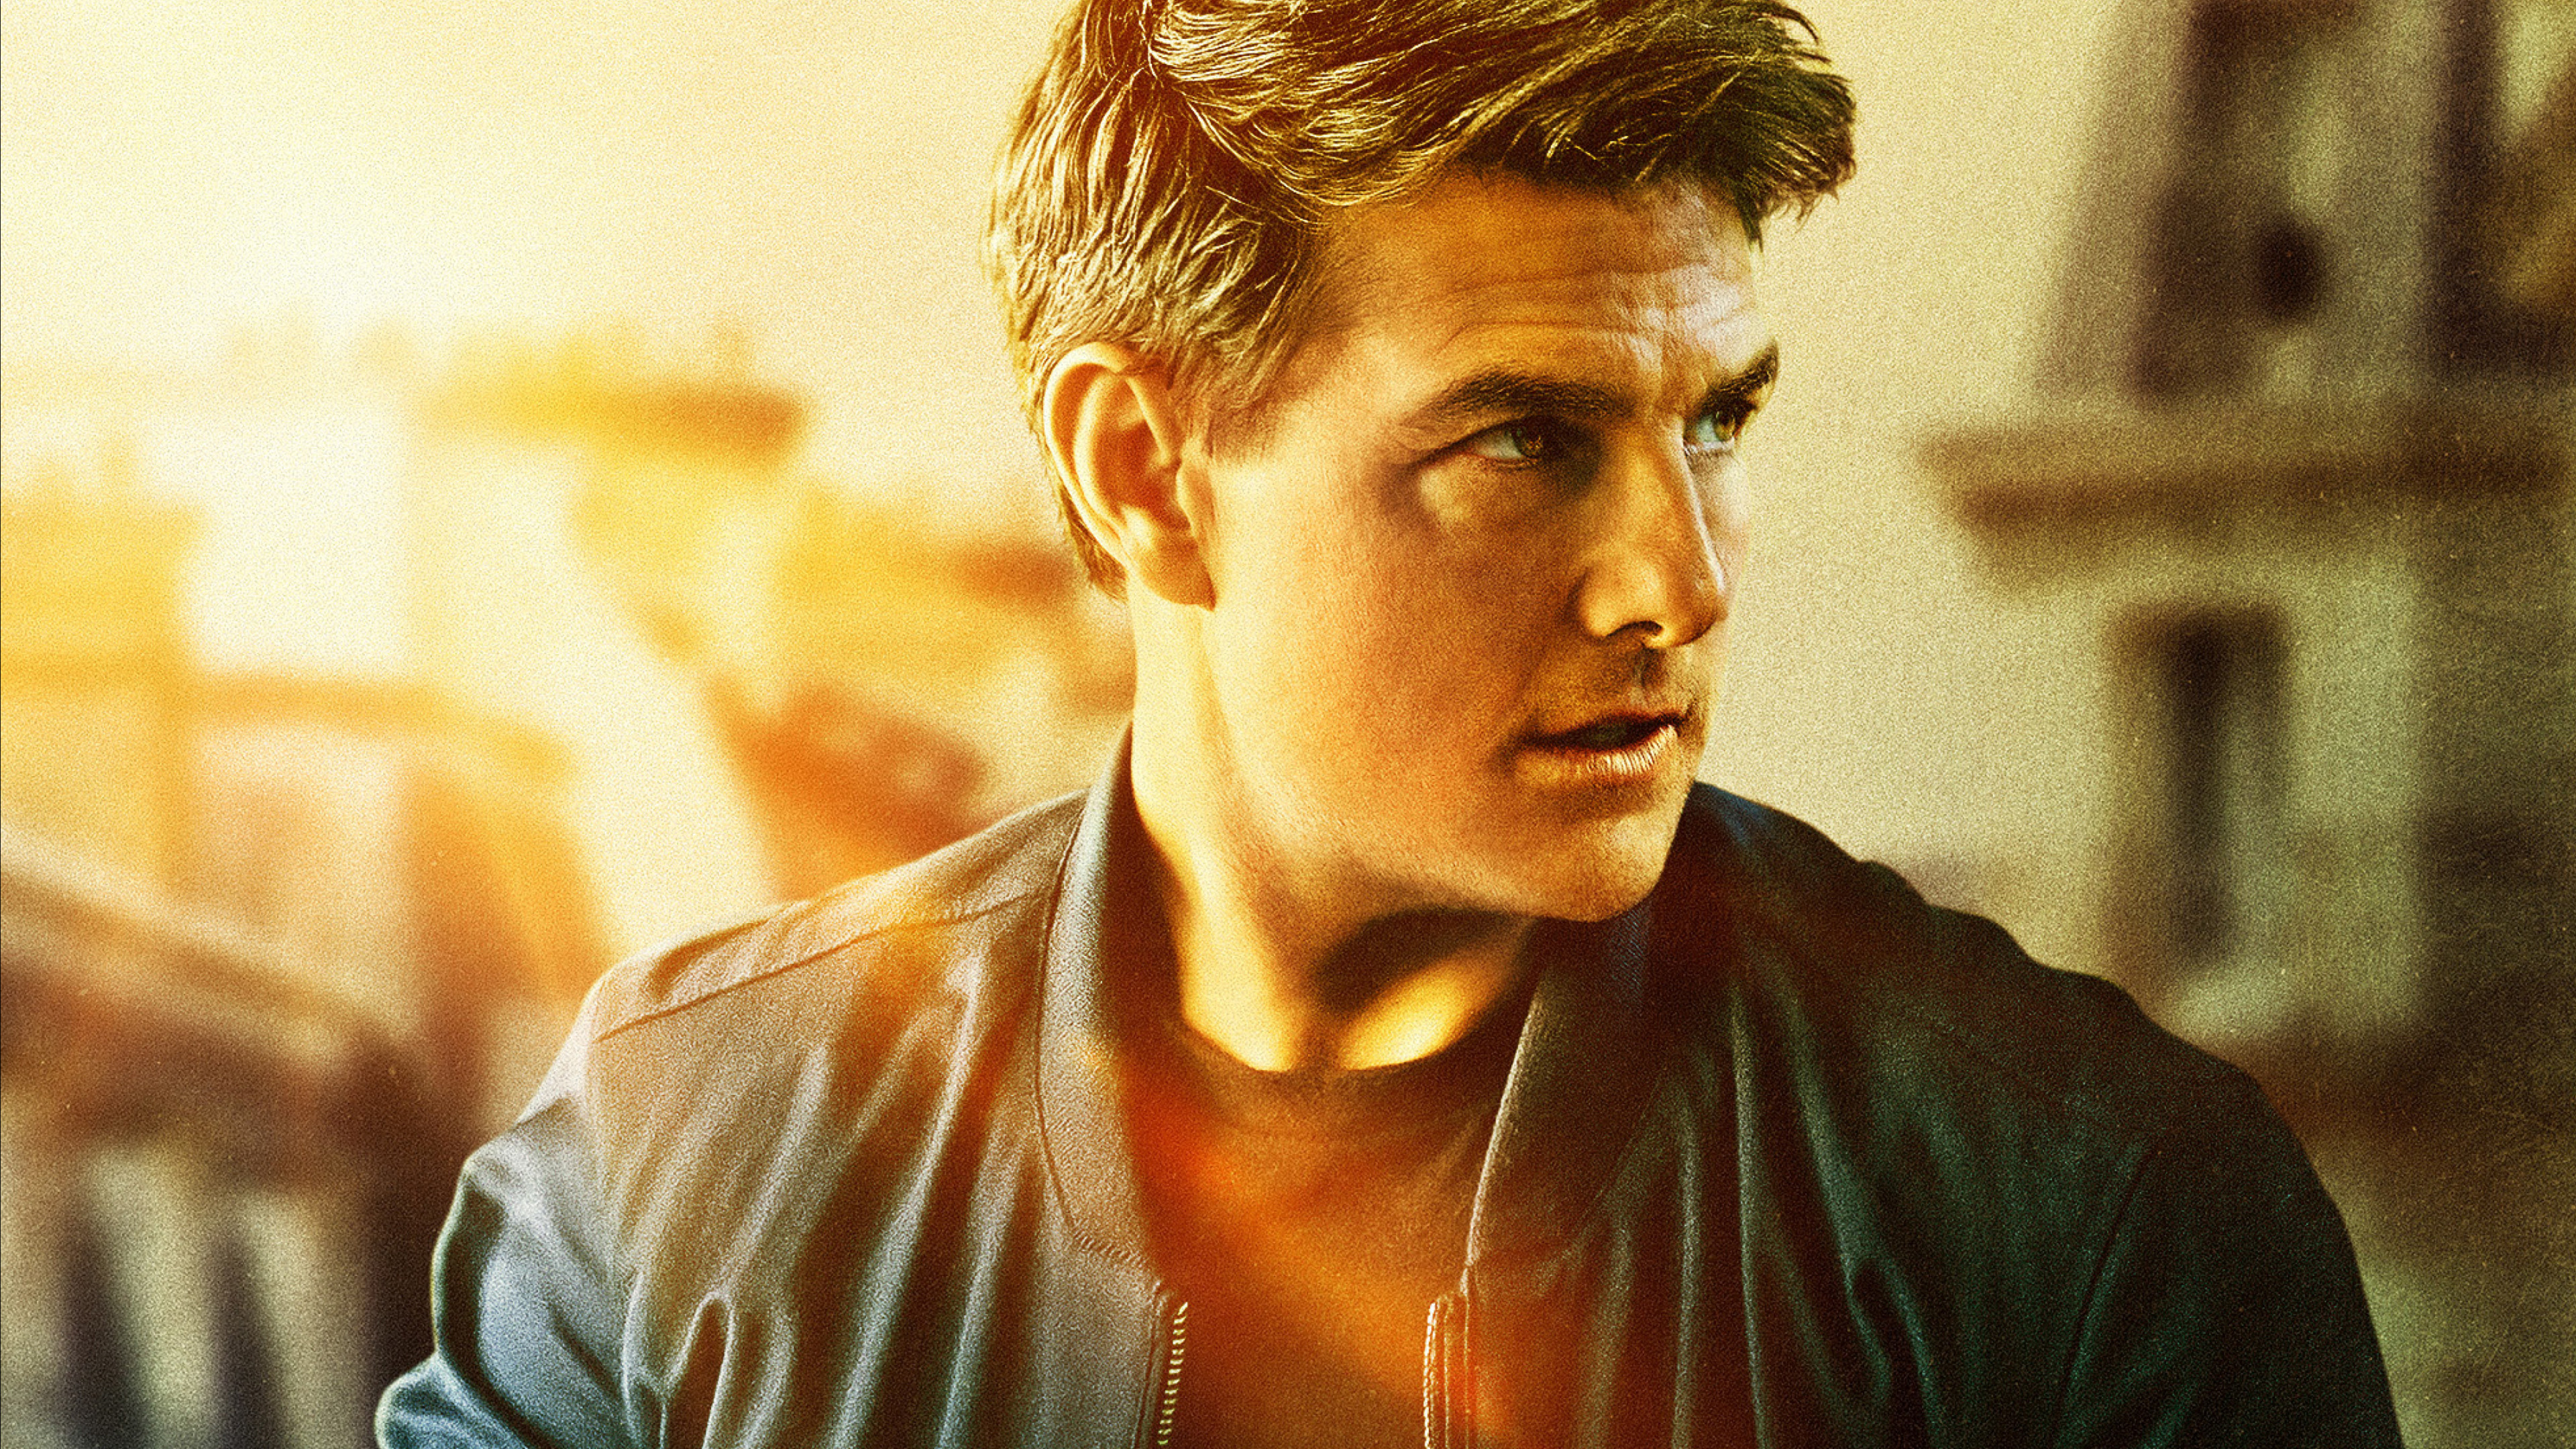 Wallpaper Mission: Impossible - Fallout, Tom Cruise, 4K, Movies #18573